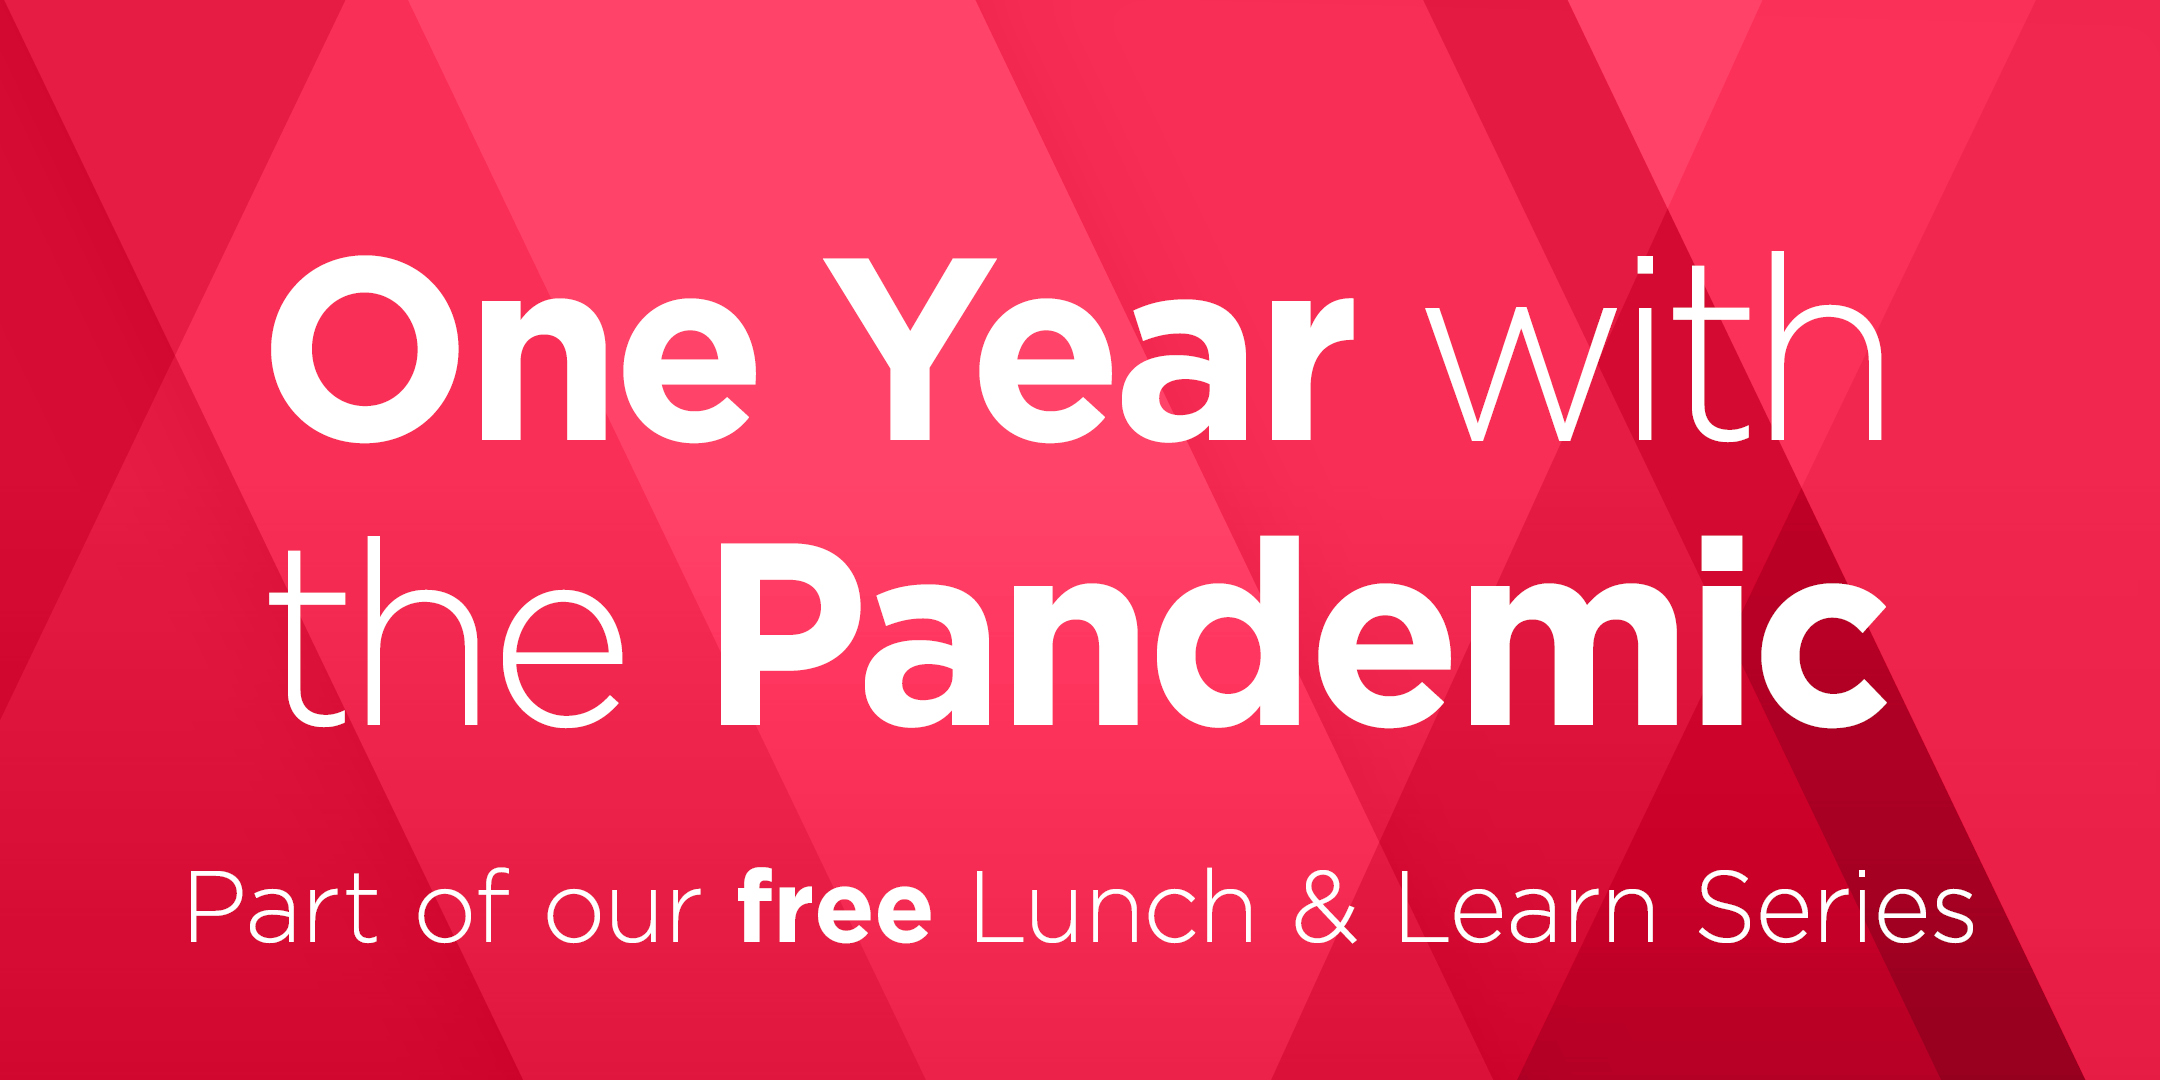 Lunch & Learn - One Year with the Pandemic